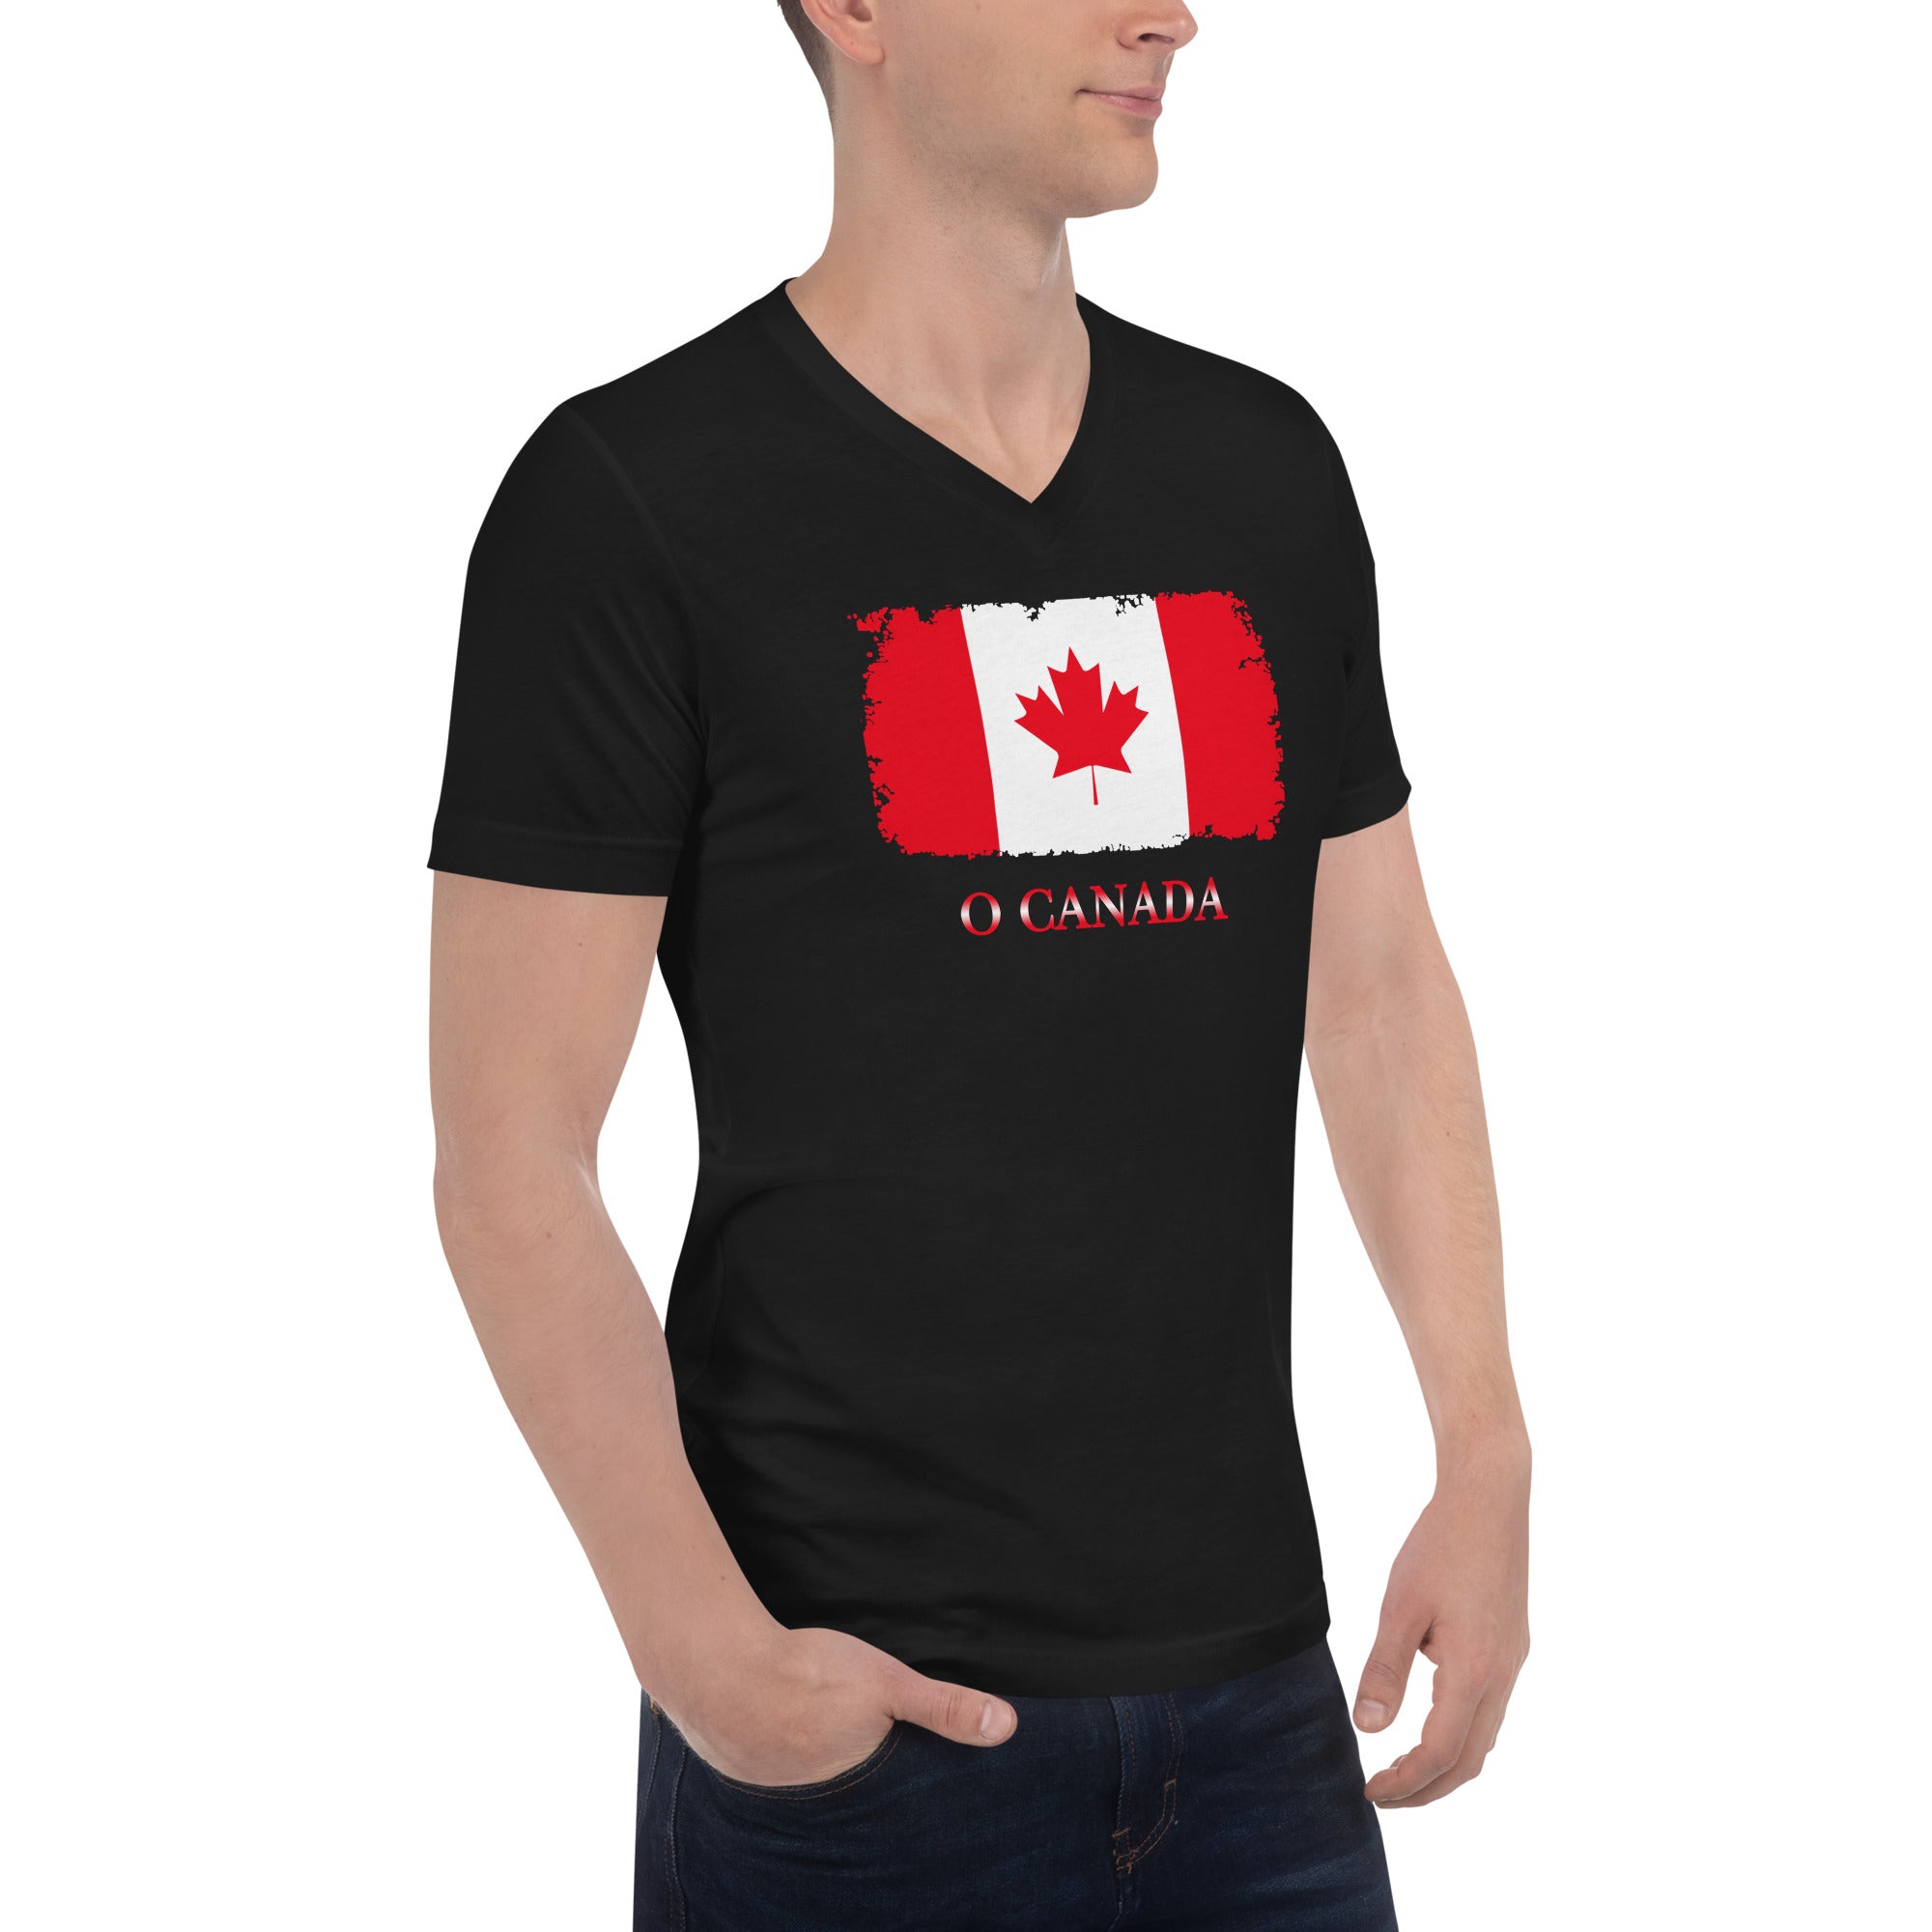 The Official Flag of Canada Maple Leaf Short Sleeve V-Neck T-Shirt